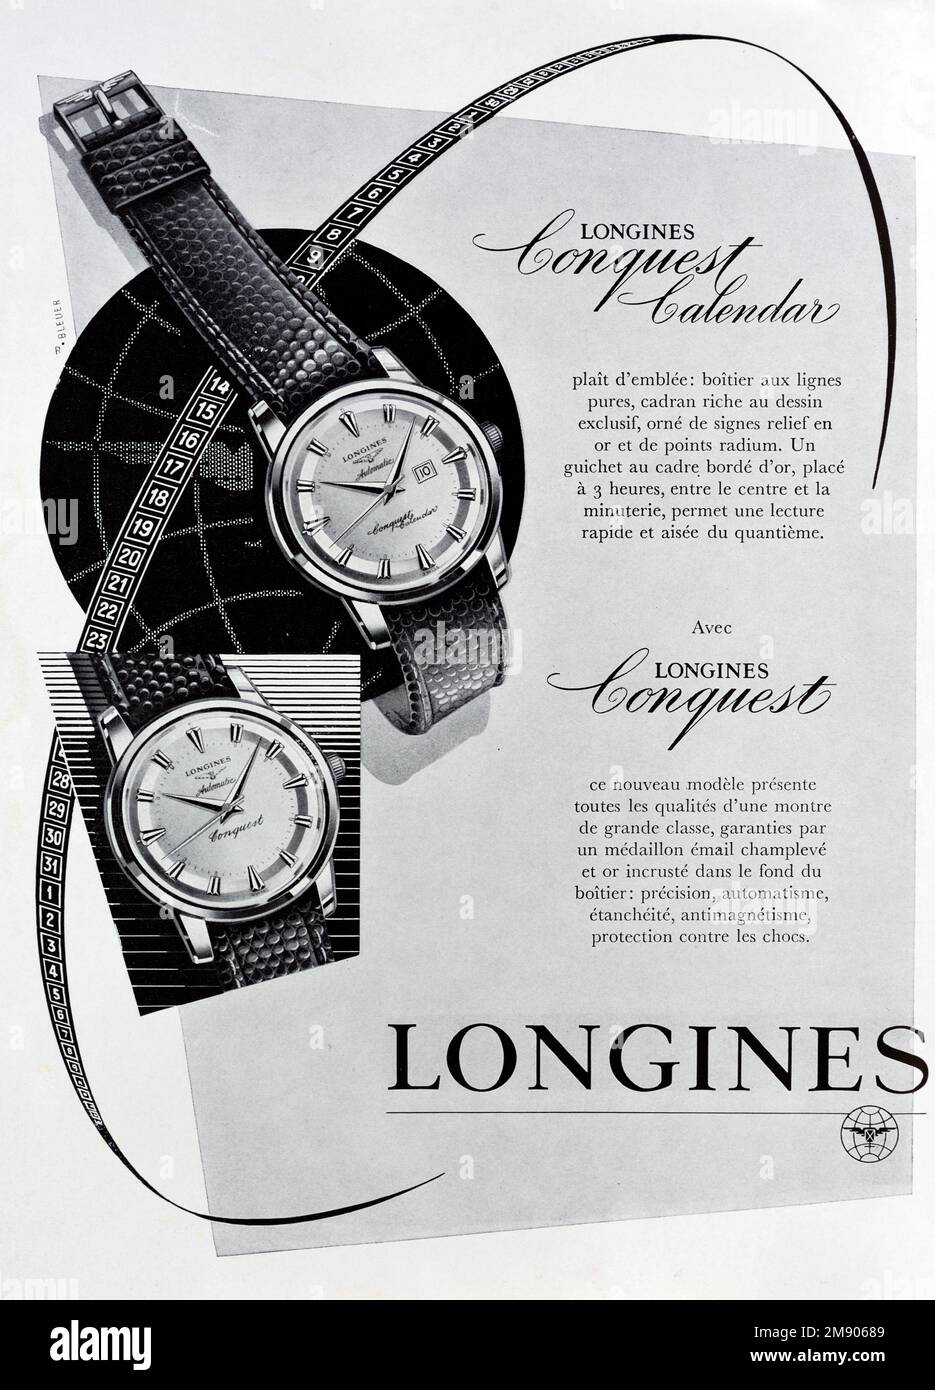 Vintage or Old Advert, Advertisement, Publicity or Illustration for Longines Watches Advert 1957 Stock Photo